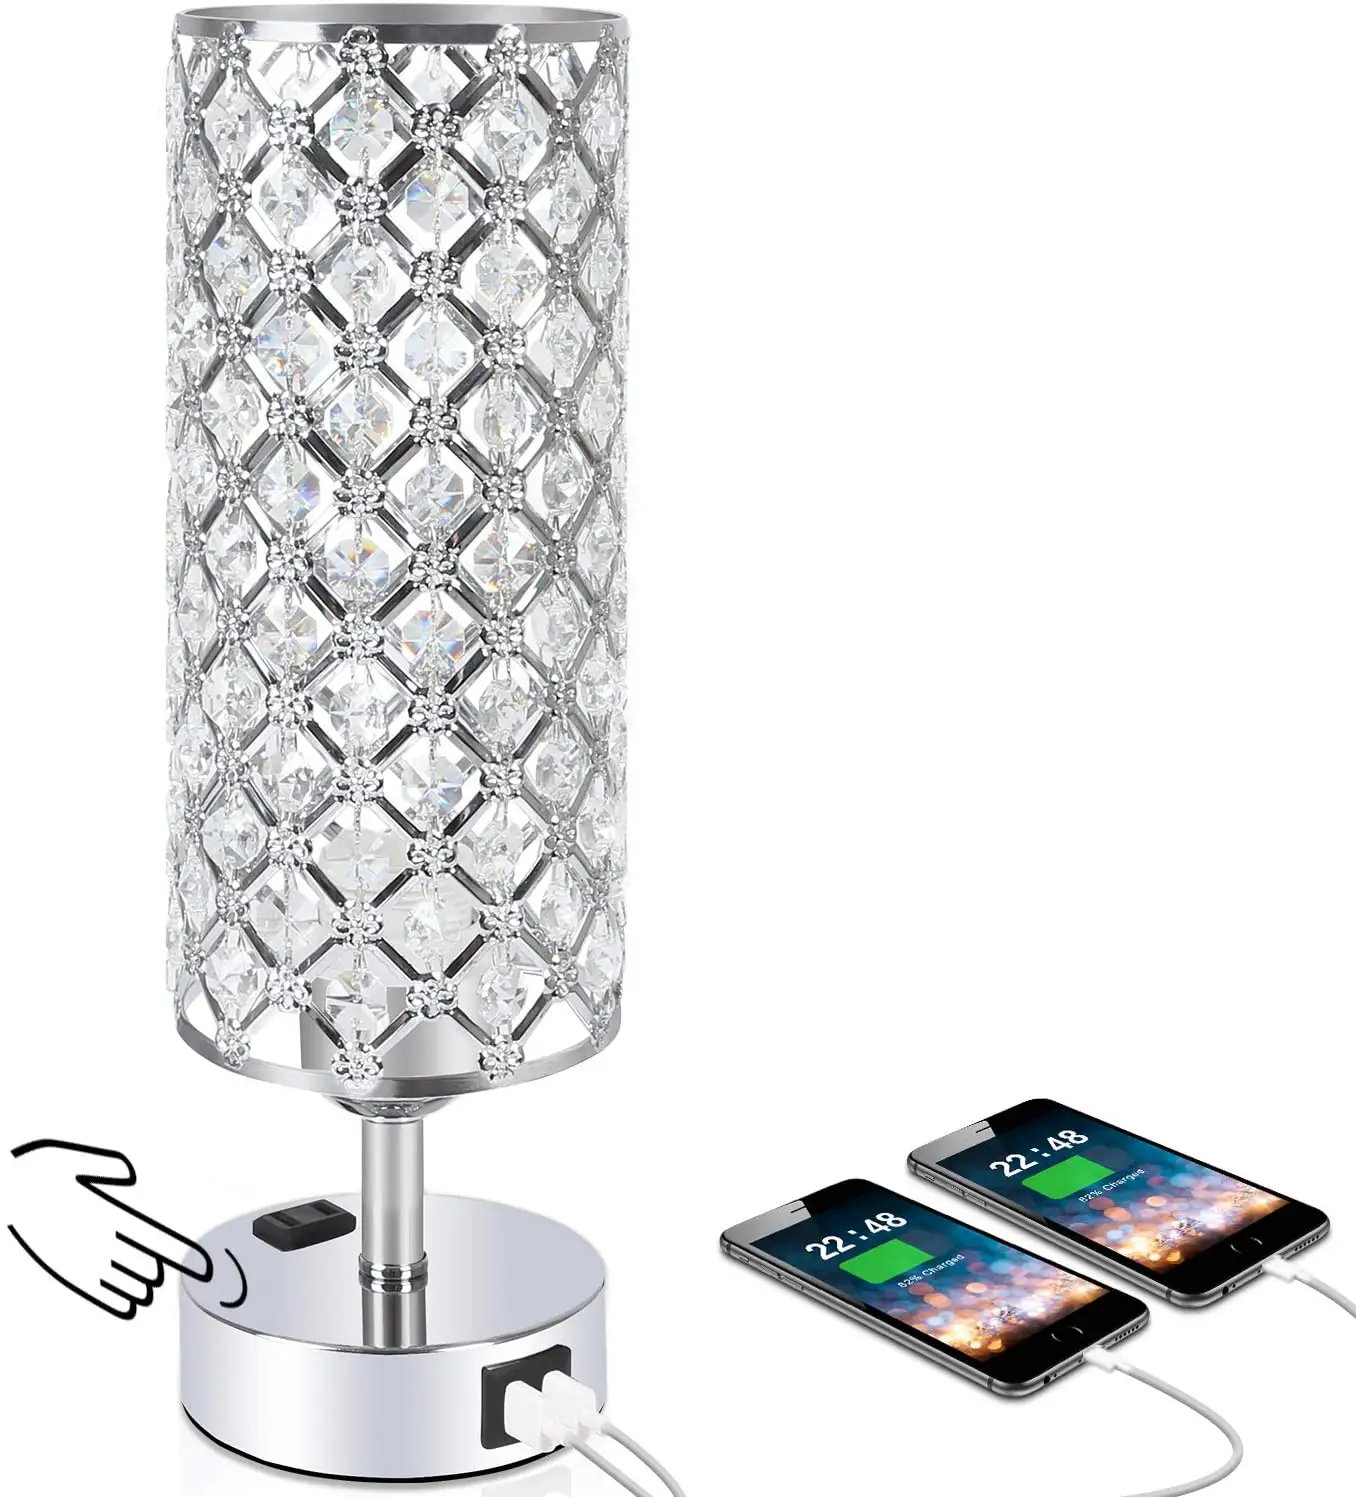 Dual USB Charging Ports 3-Way Dimmable K9 Crystal Bedside Lamp 3-Way Dimmable Nightstand Lamp Touch Control Crystal Table Lamp